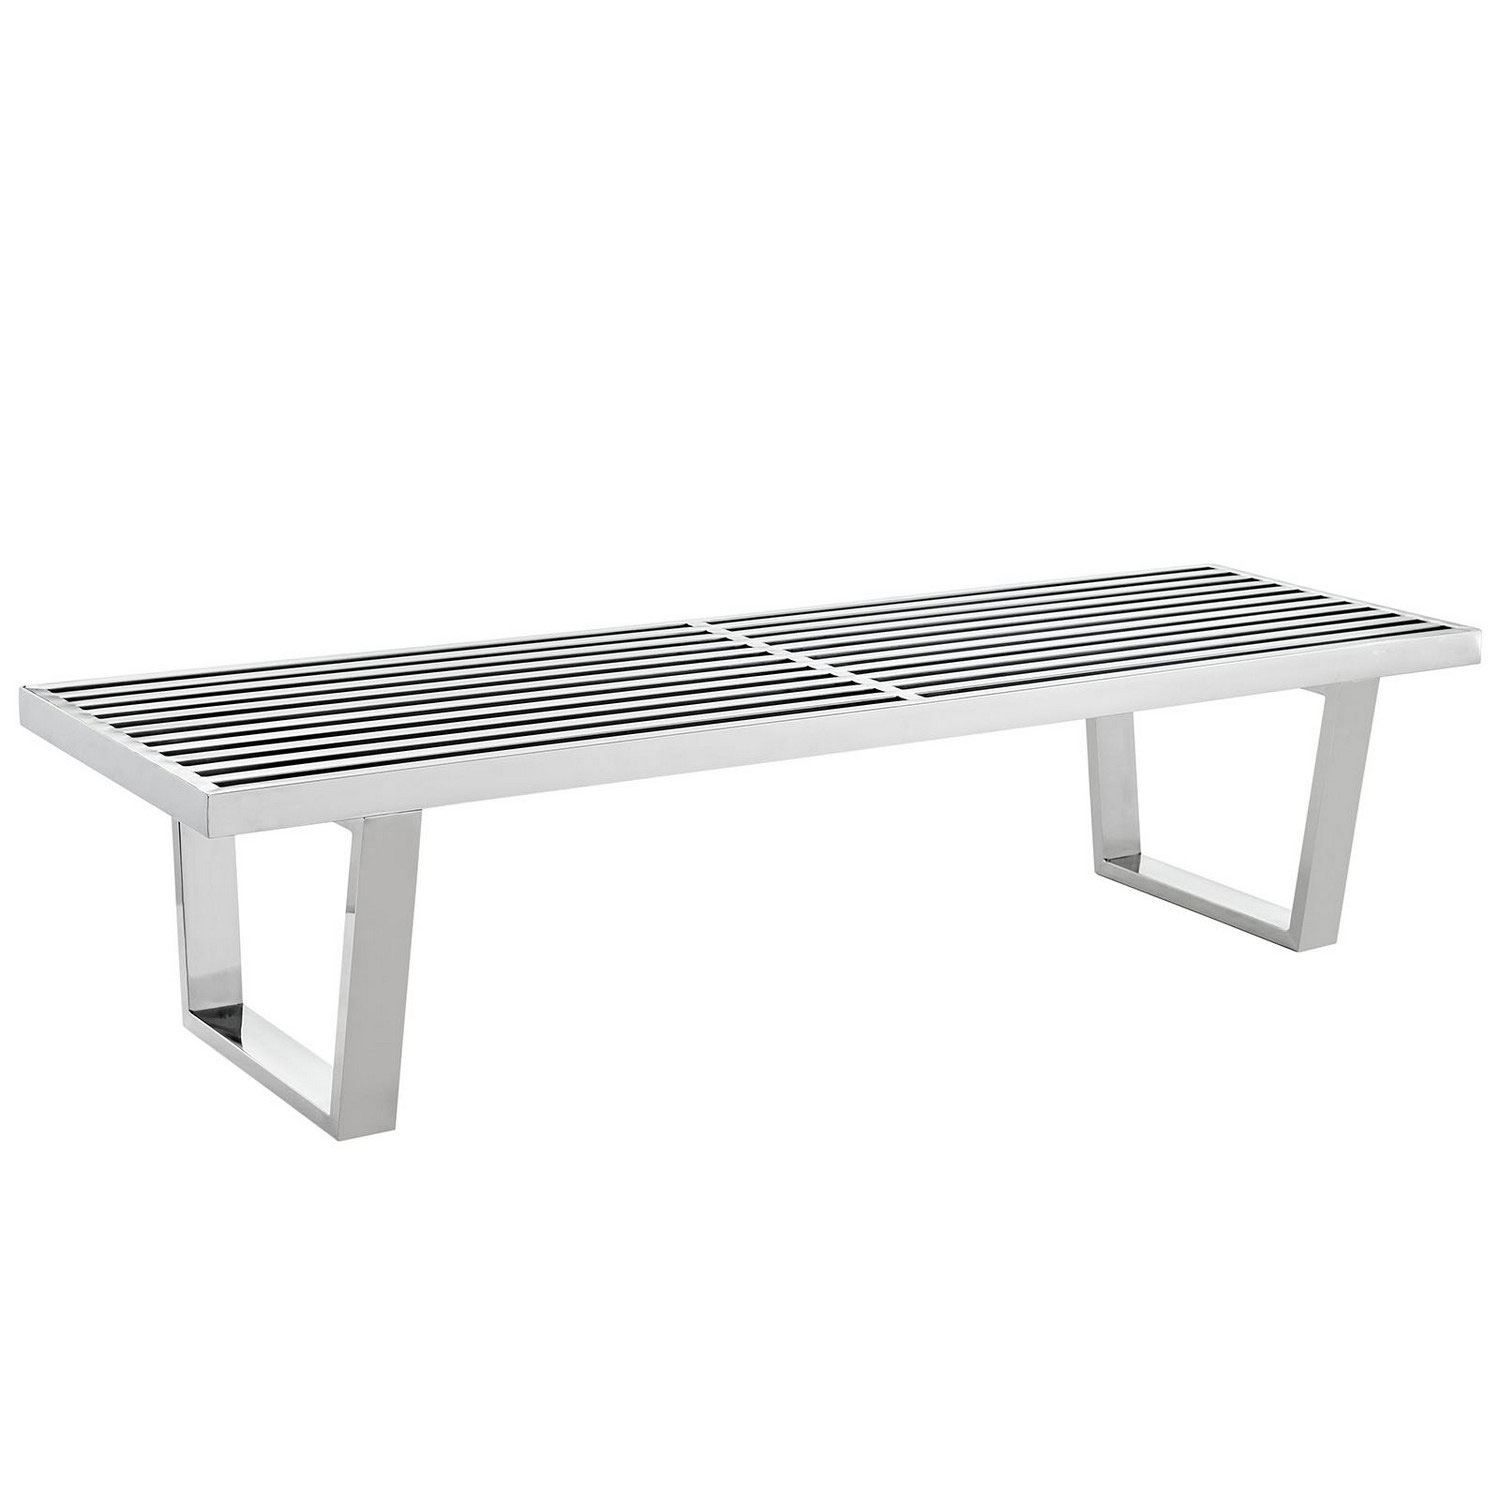 Modway Sauna 5 Foot Stainless Steel Bench - Silver